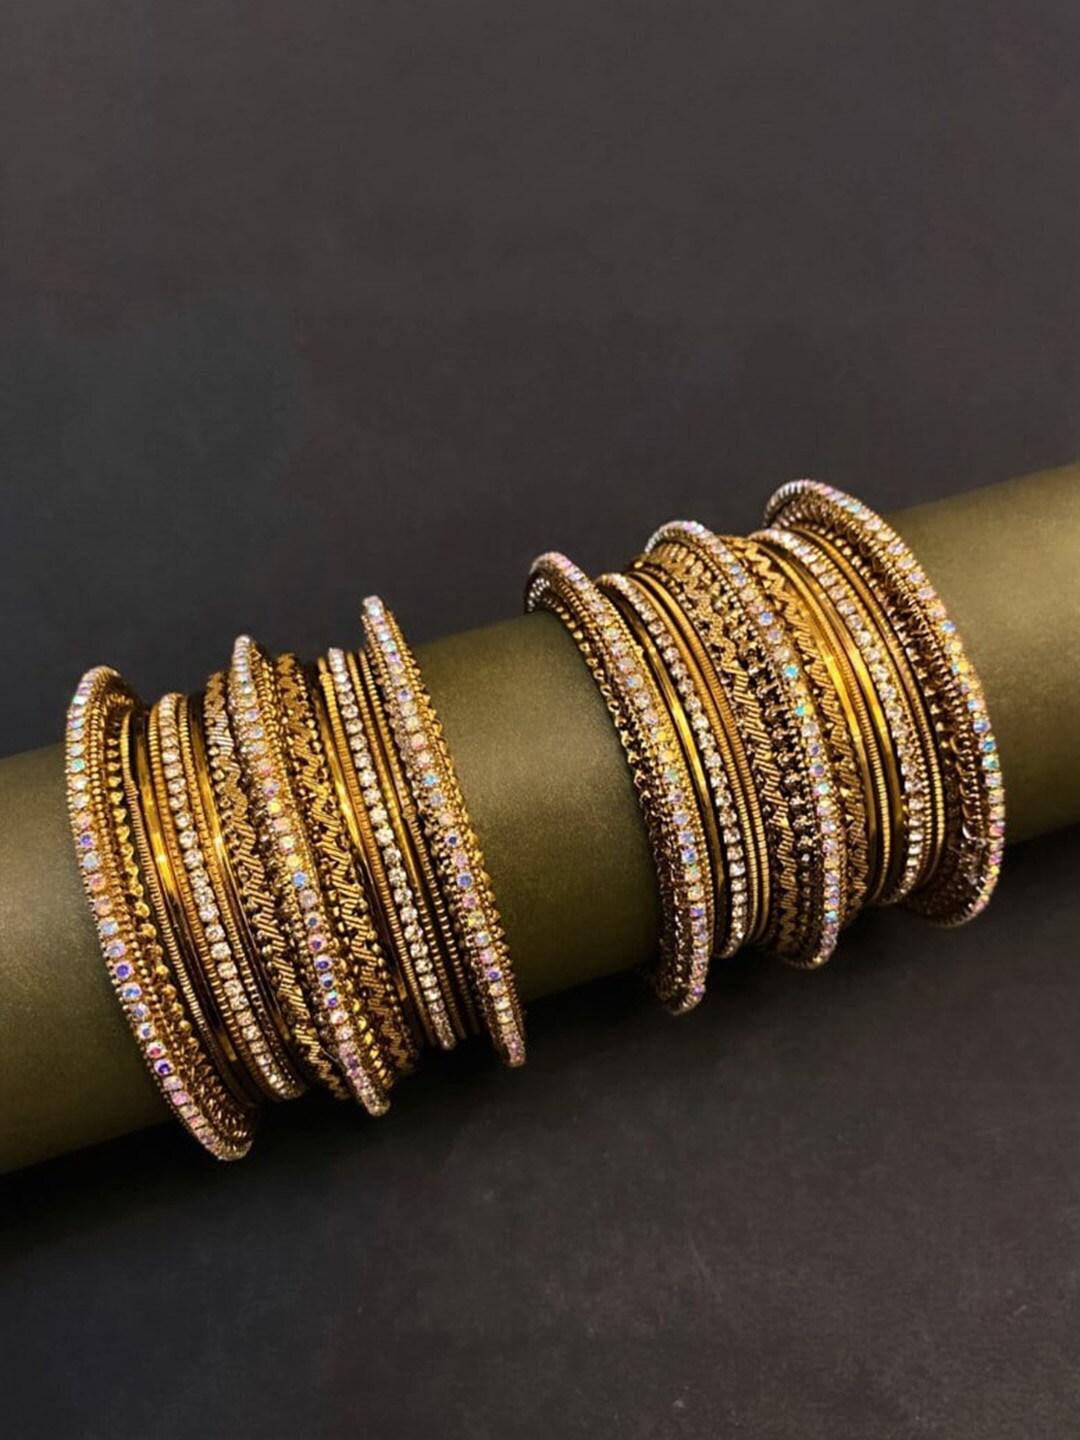 atibelle set of 26 copper-plated & ad-studded bangles